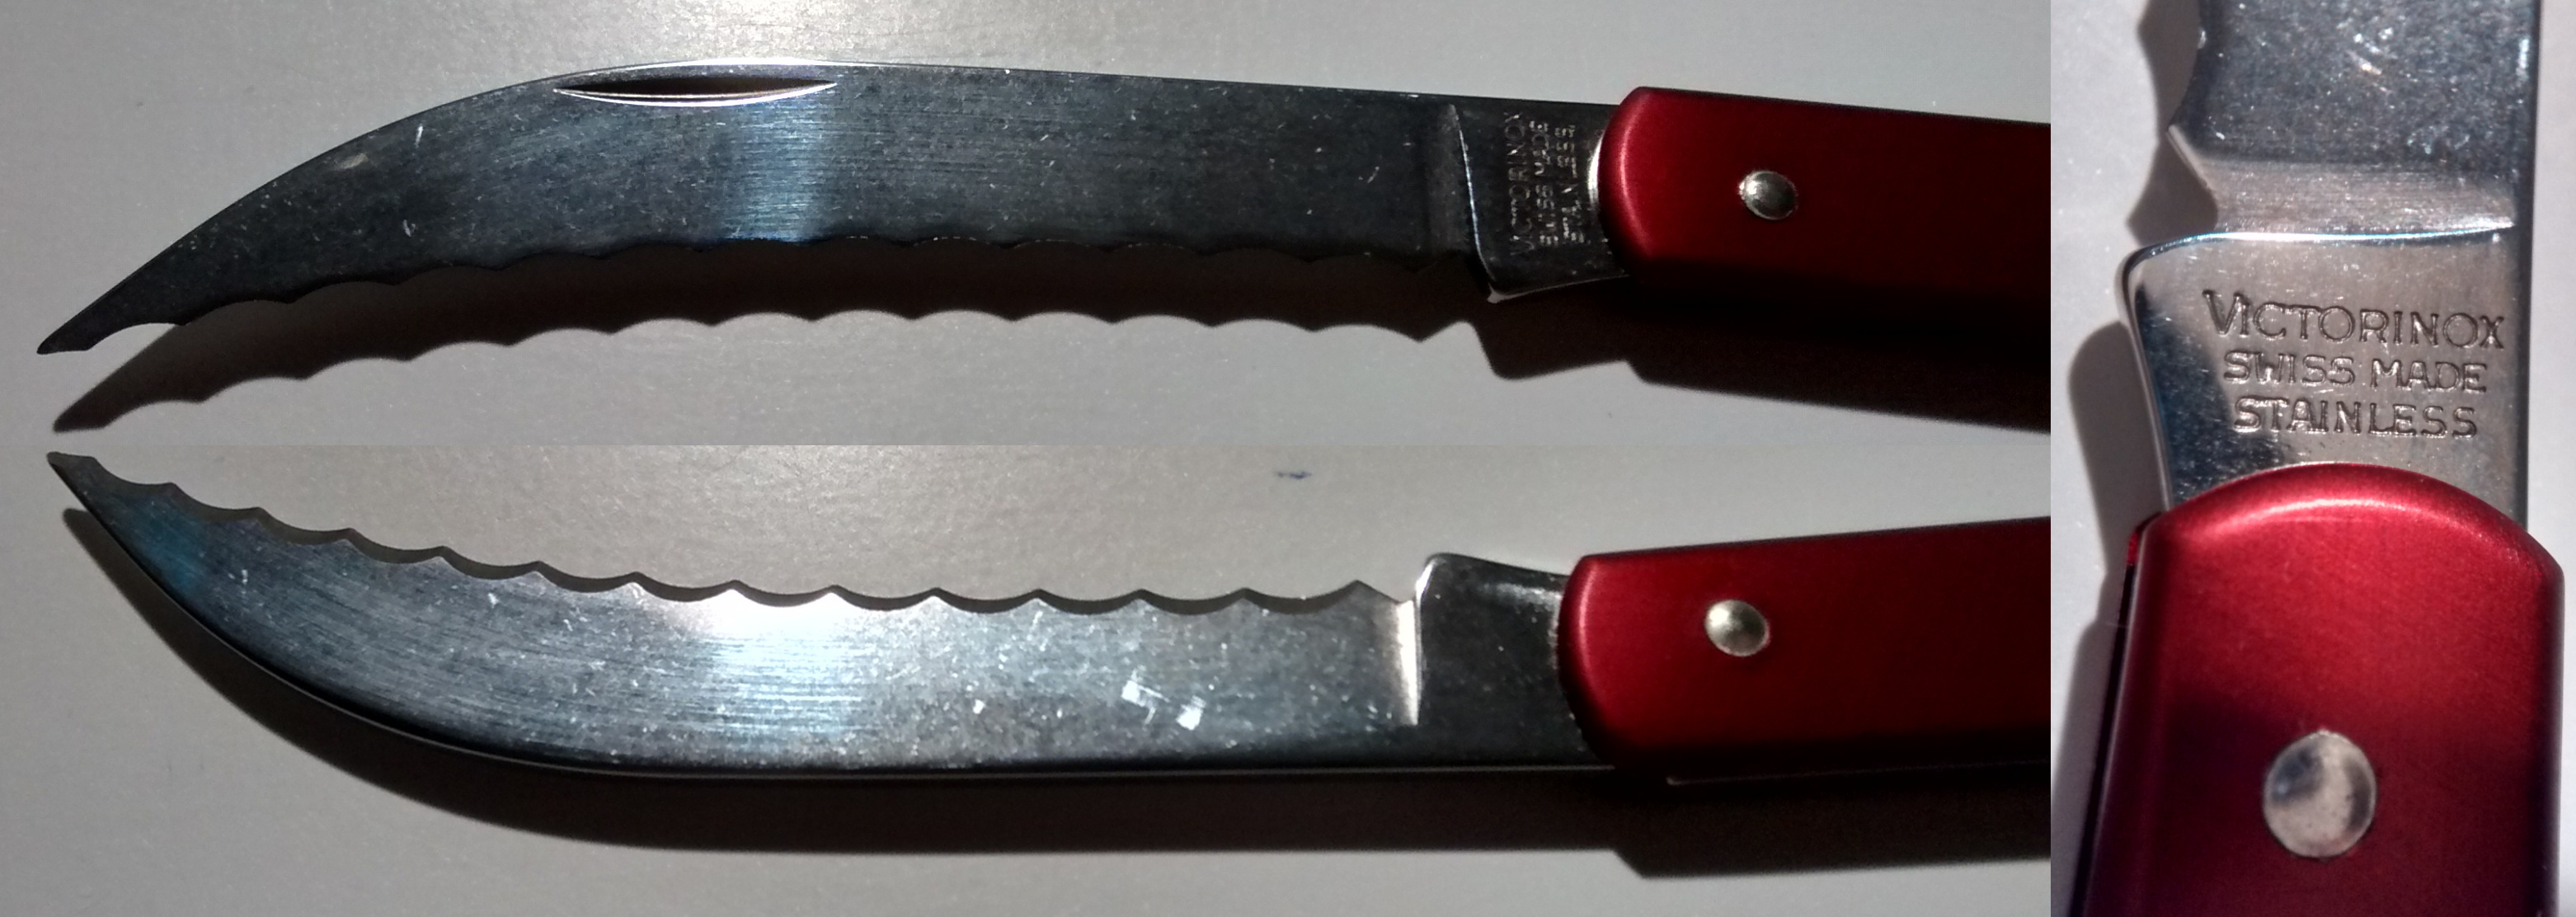 Close-up image of the Baker's Knife Serrated Blade